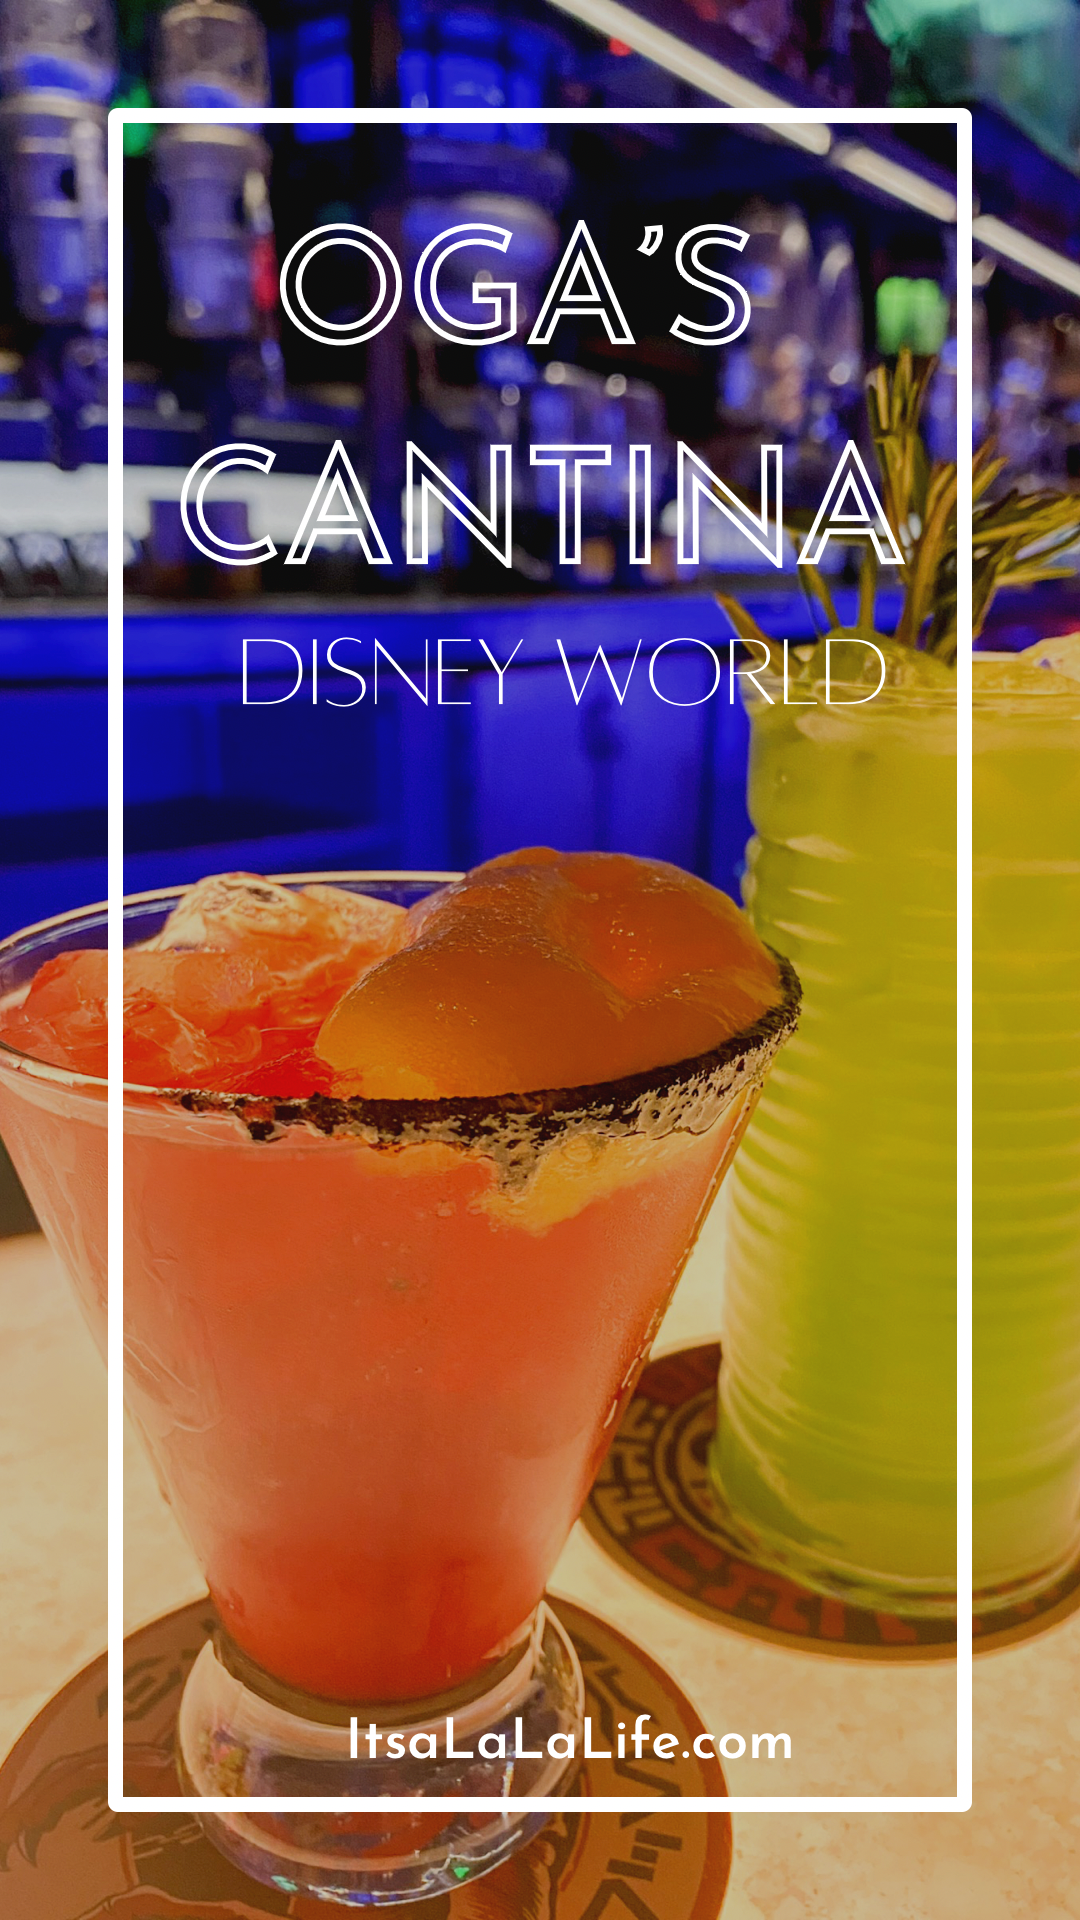 Cocktails at Oga’s Cantina